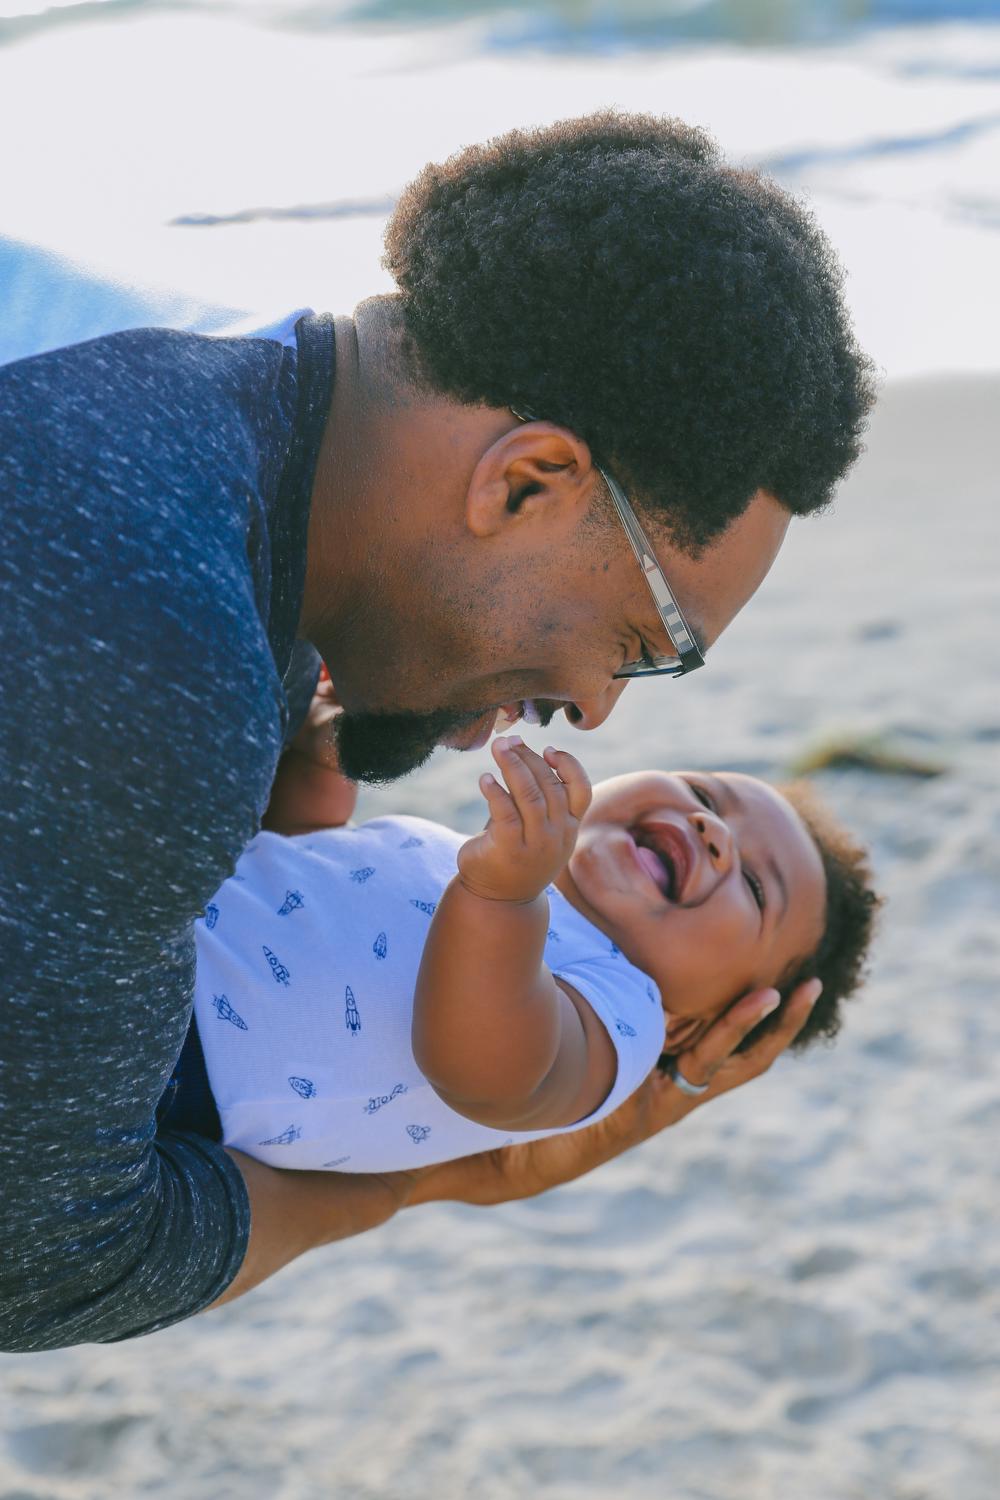 A Black father with glasses and a blue shirt playfully cradles his infant child while the infant laughs. They are on a beach.